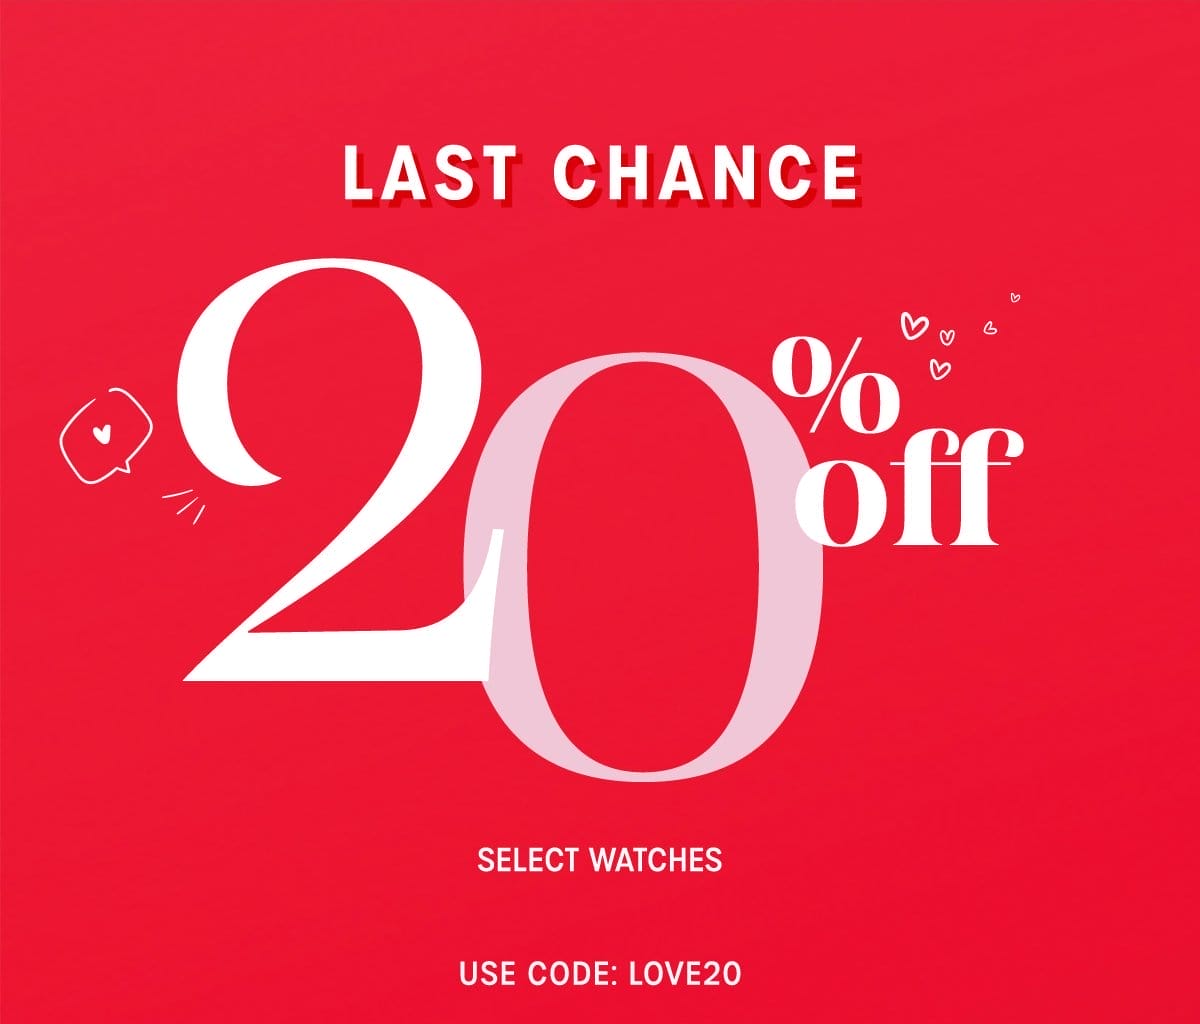 LAST CHANCE 20% OFF SELECT WATCHES | USE CODE: LOVE20